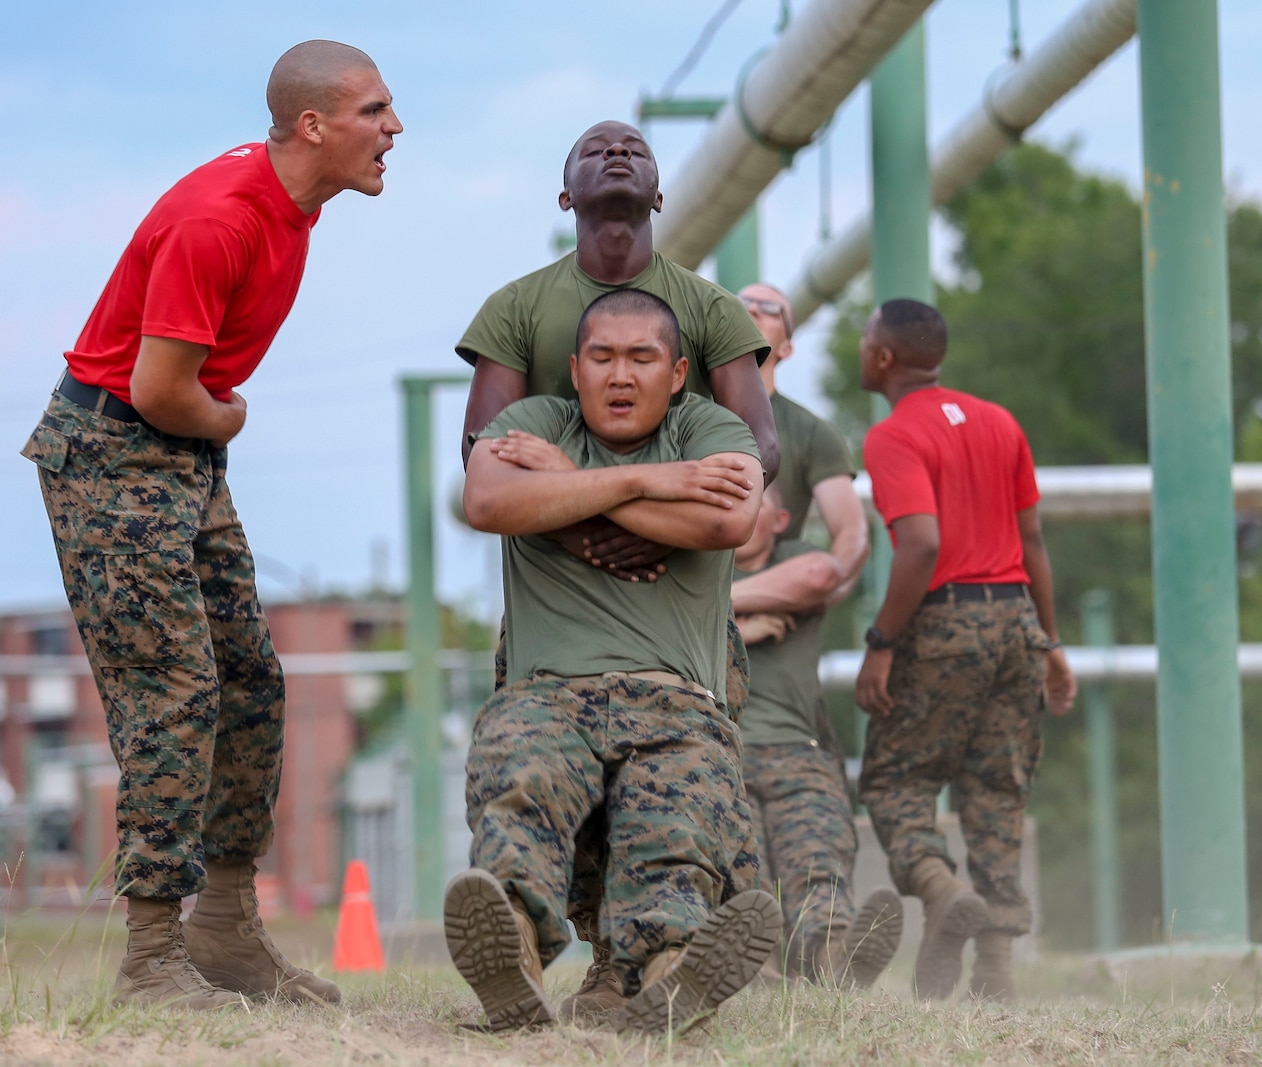 Recruits with Bravo Company, 2nd Recruit Training Battalion, complete numerous challenges during the Obstacle Course on Marine Corps Recruit Depot Parris Island, South Carolina, May 30, 2019. This event is comprised of various obstacles and is designed to help recruits build confidence by overcoming physical challenges. (U.S. Marine Corps photo by Lance Cpl. Dylan Walters)